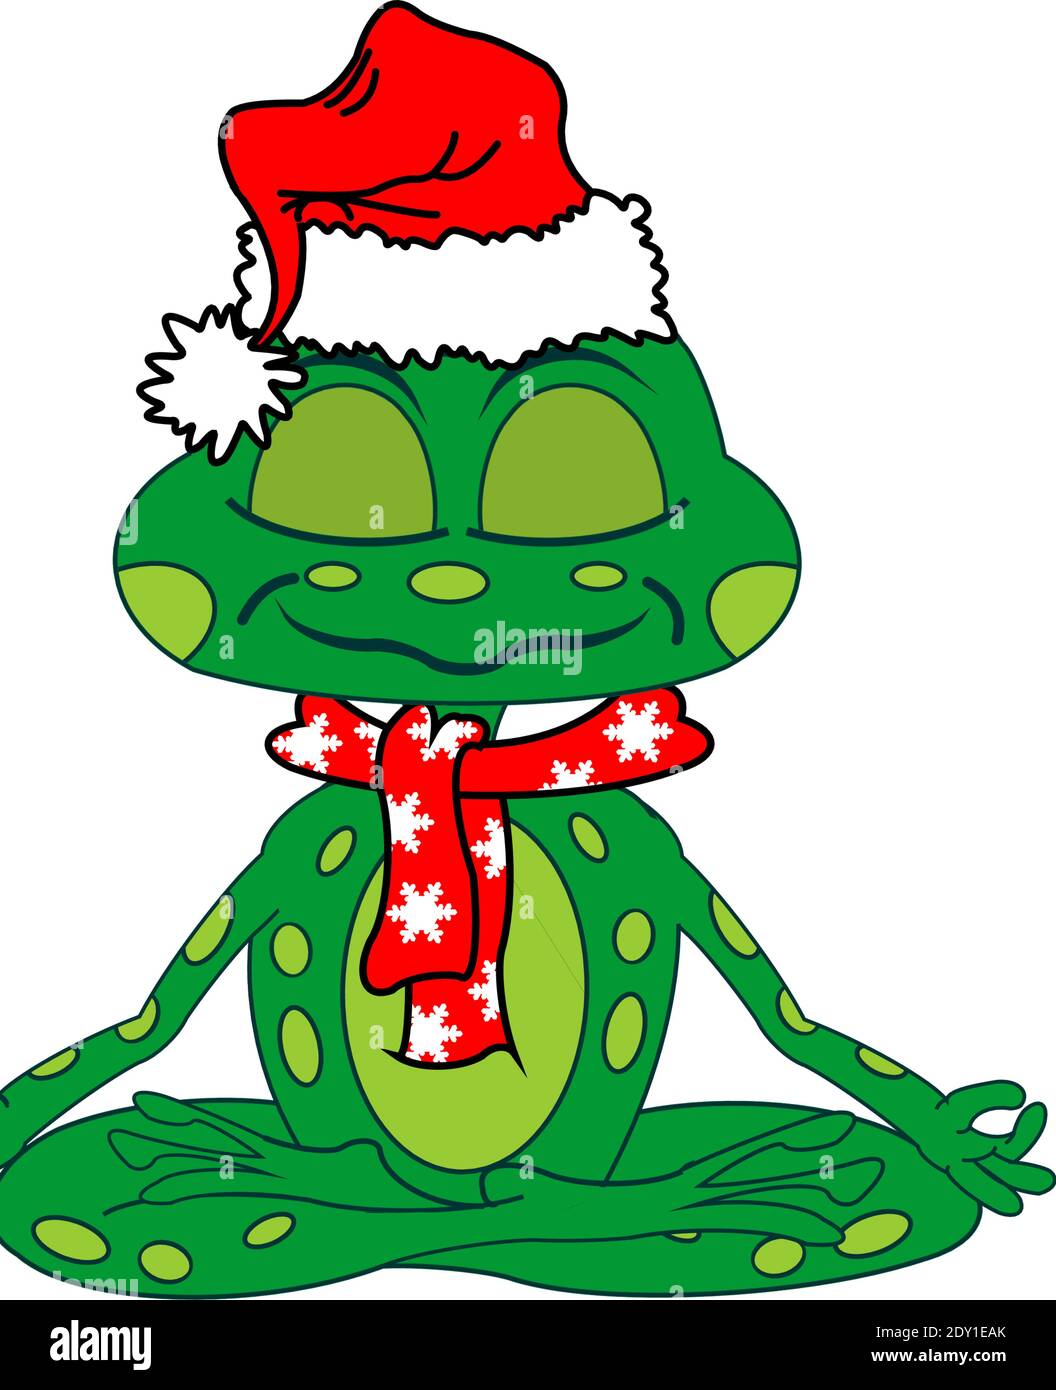 Christmas Party Meditation frog with Santa hat and scarf Stock Vector